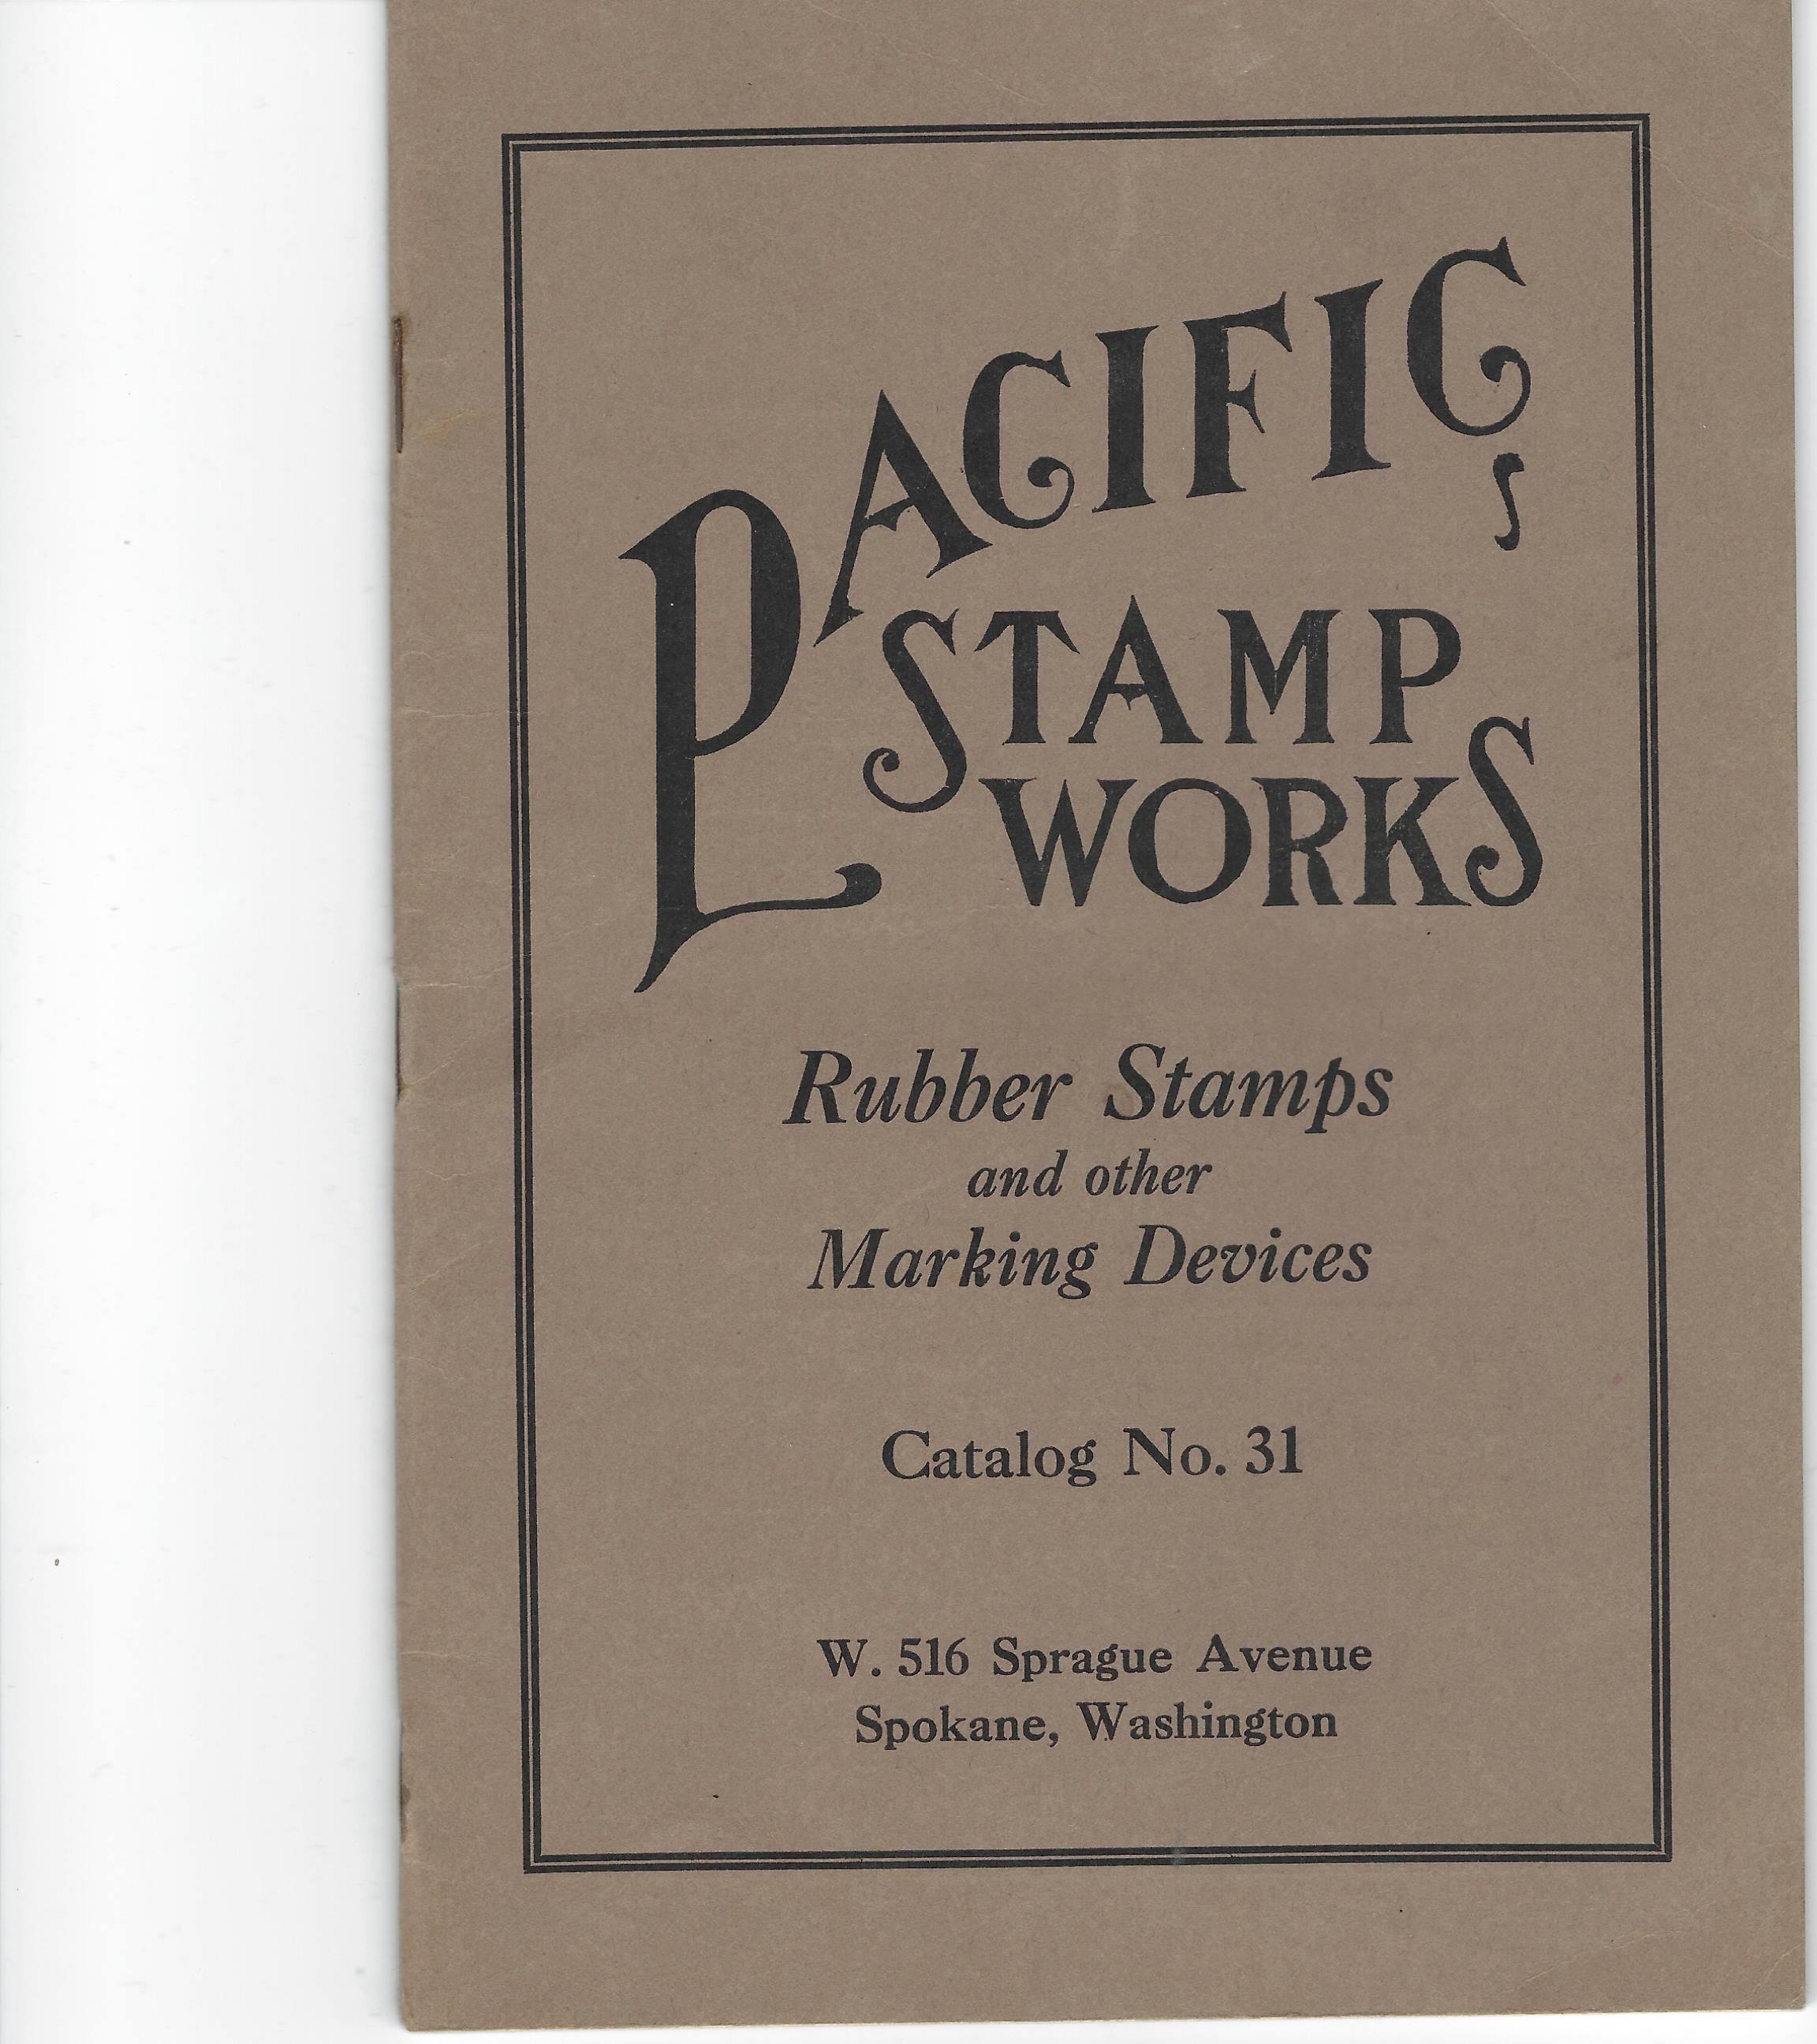 Pacific Stamp Works Cat 31